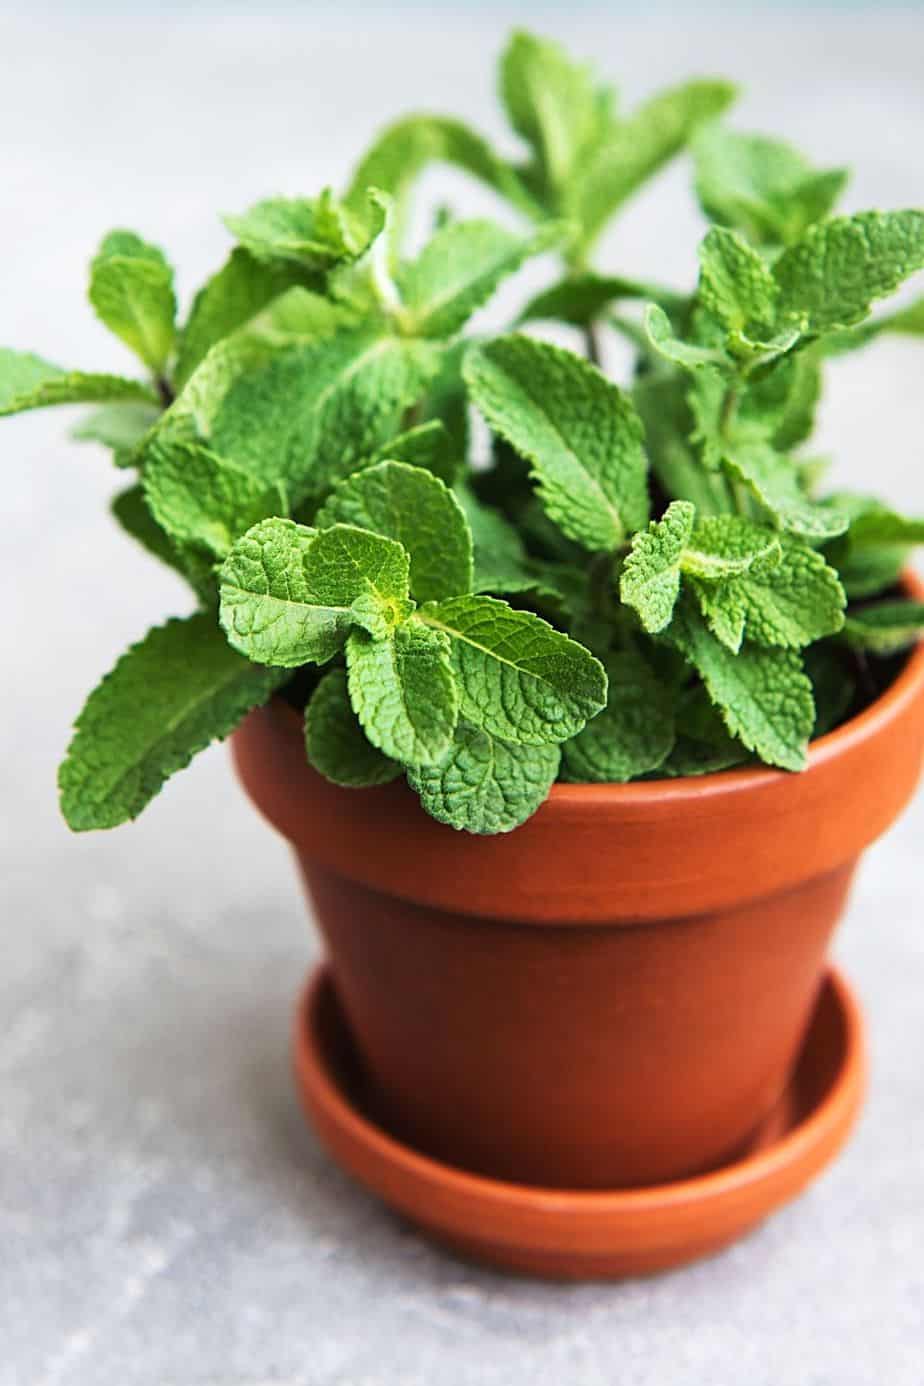 Mint is another perennial herb you can add to your east-facing balcony collection